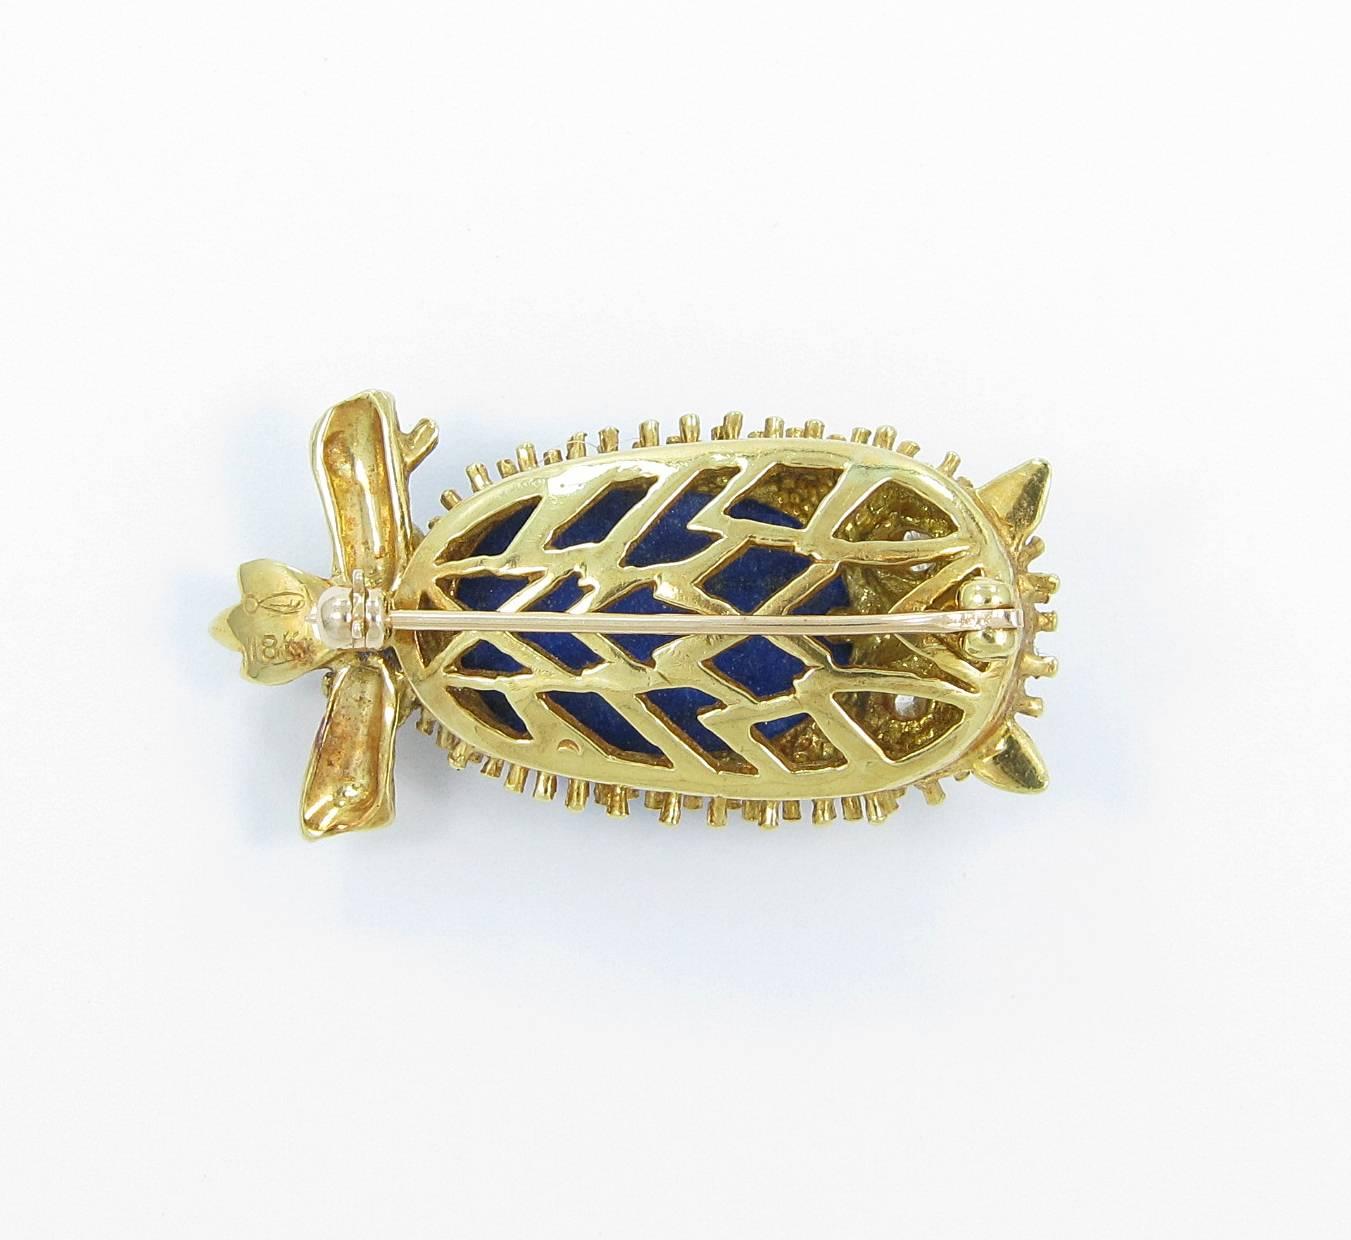 This 18k yellow gold owl pin hold 2 round brilliant cut diamond eyes that are approximately .08cts each with great color and clarity. Lapis measures 18mm x 13mm with a depth of around 6mm. Owl measures 1.50inches from head tail and .75inches from